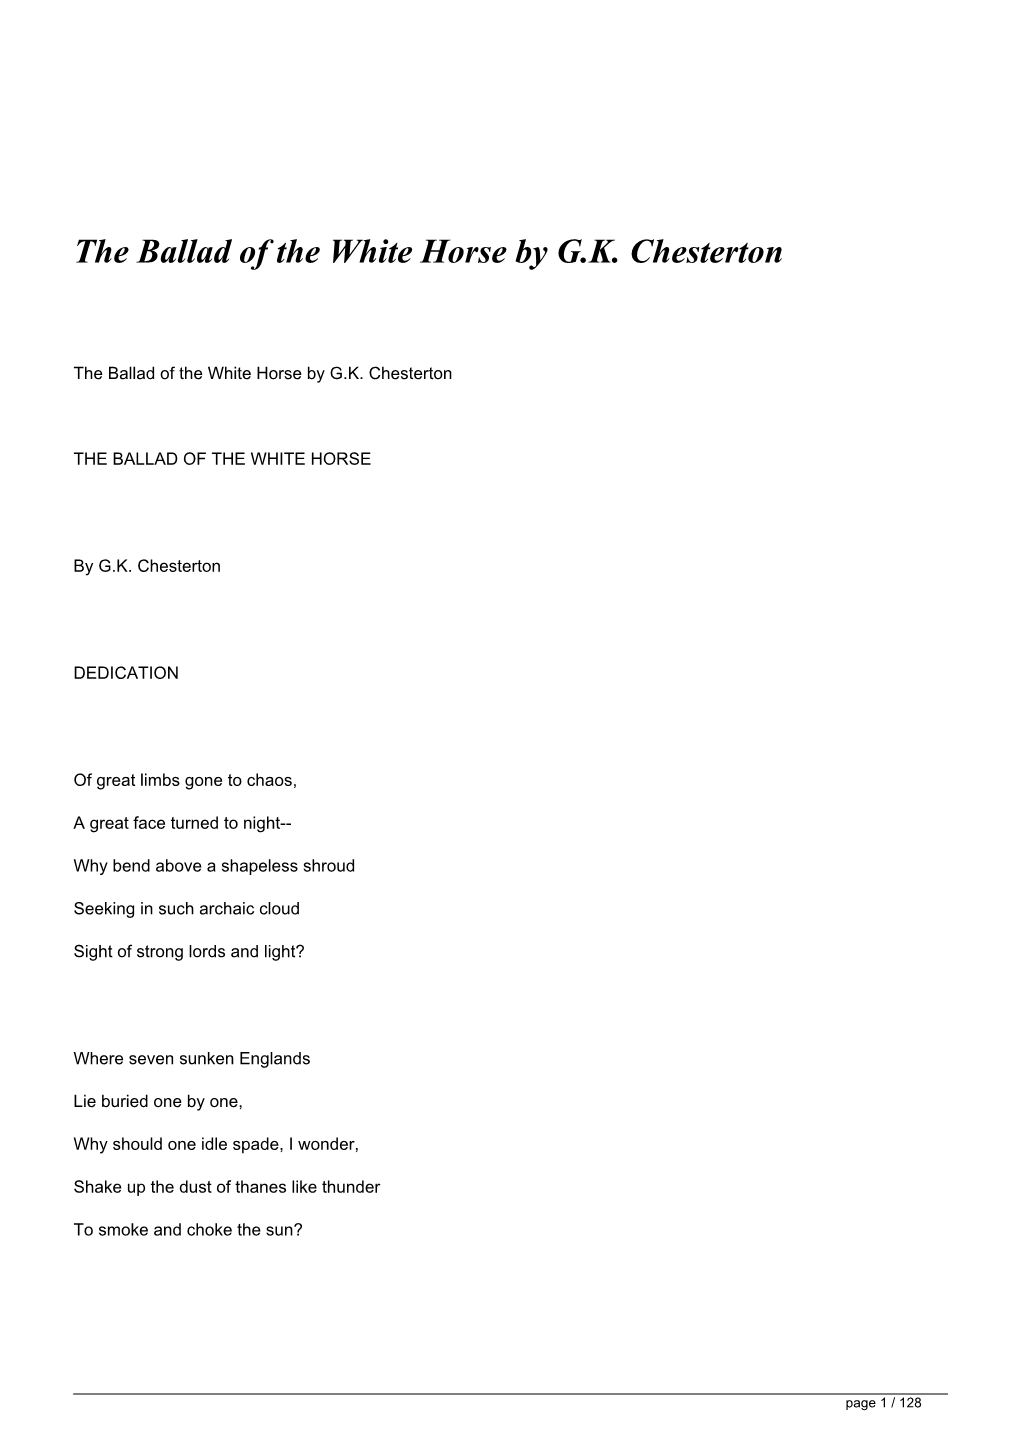 The Ballad of the White Horse by G.K